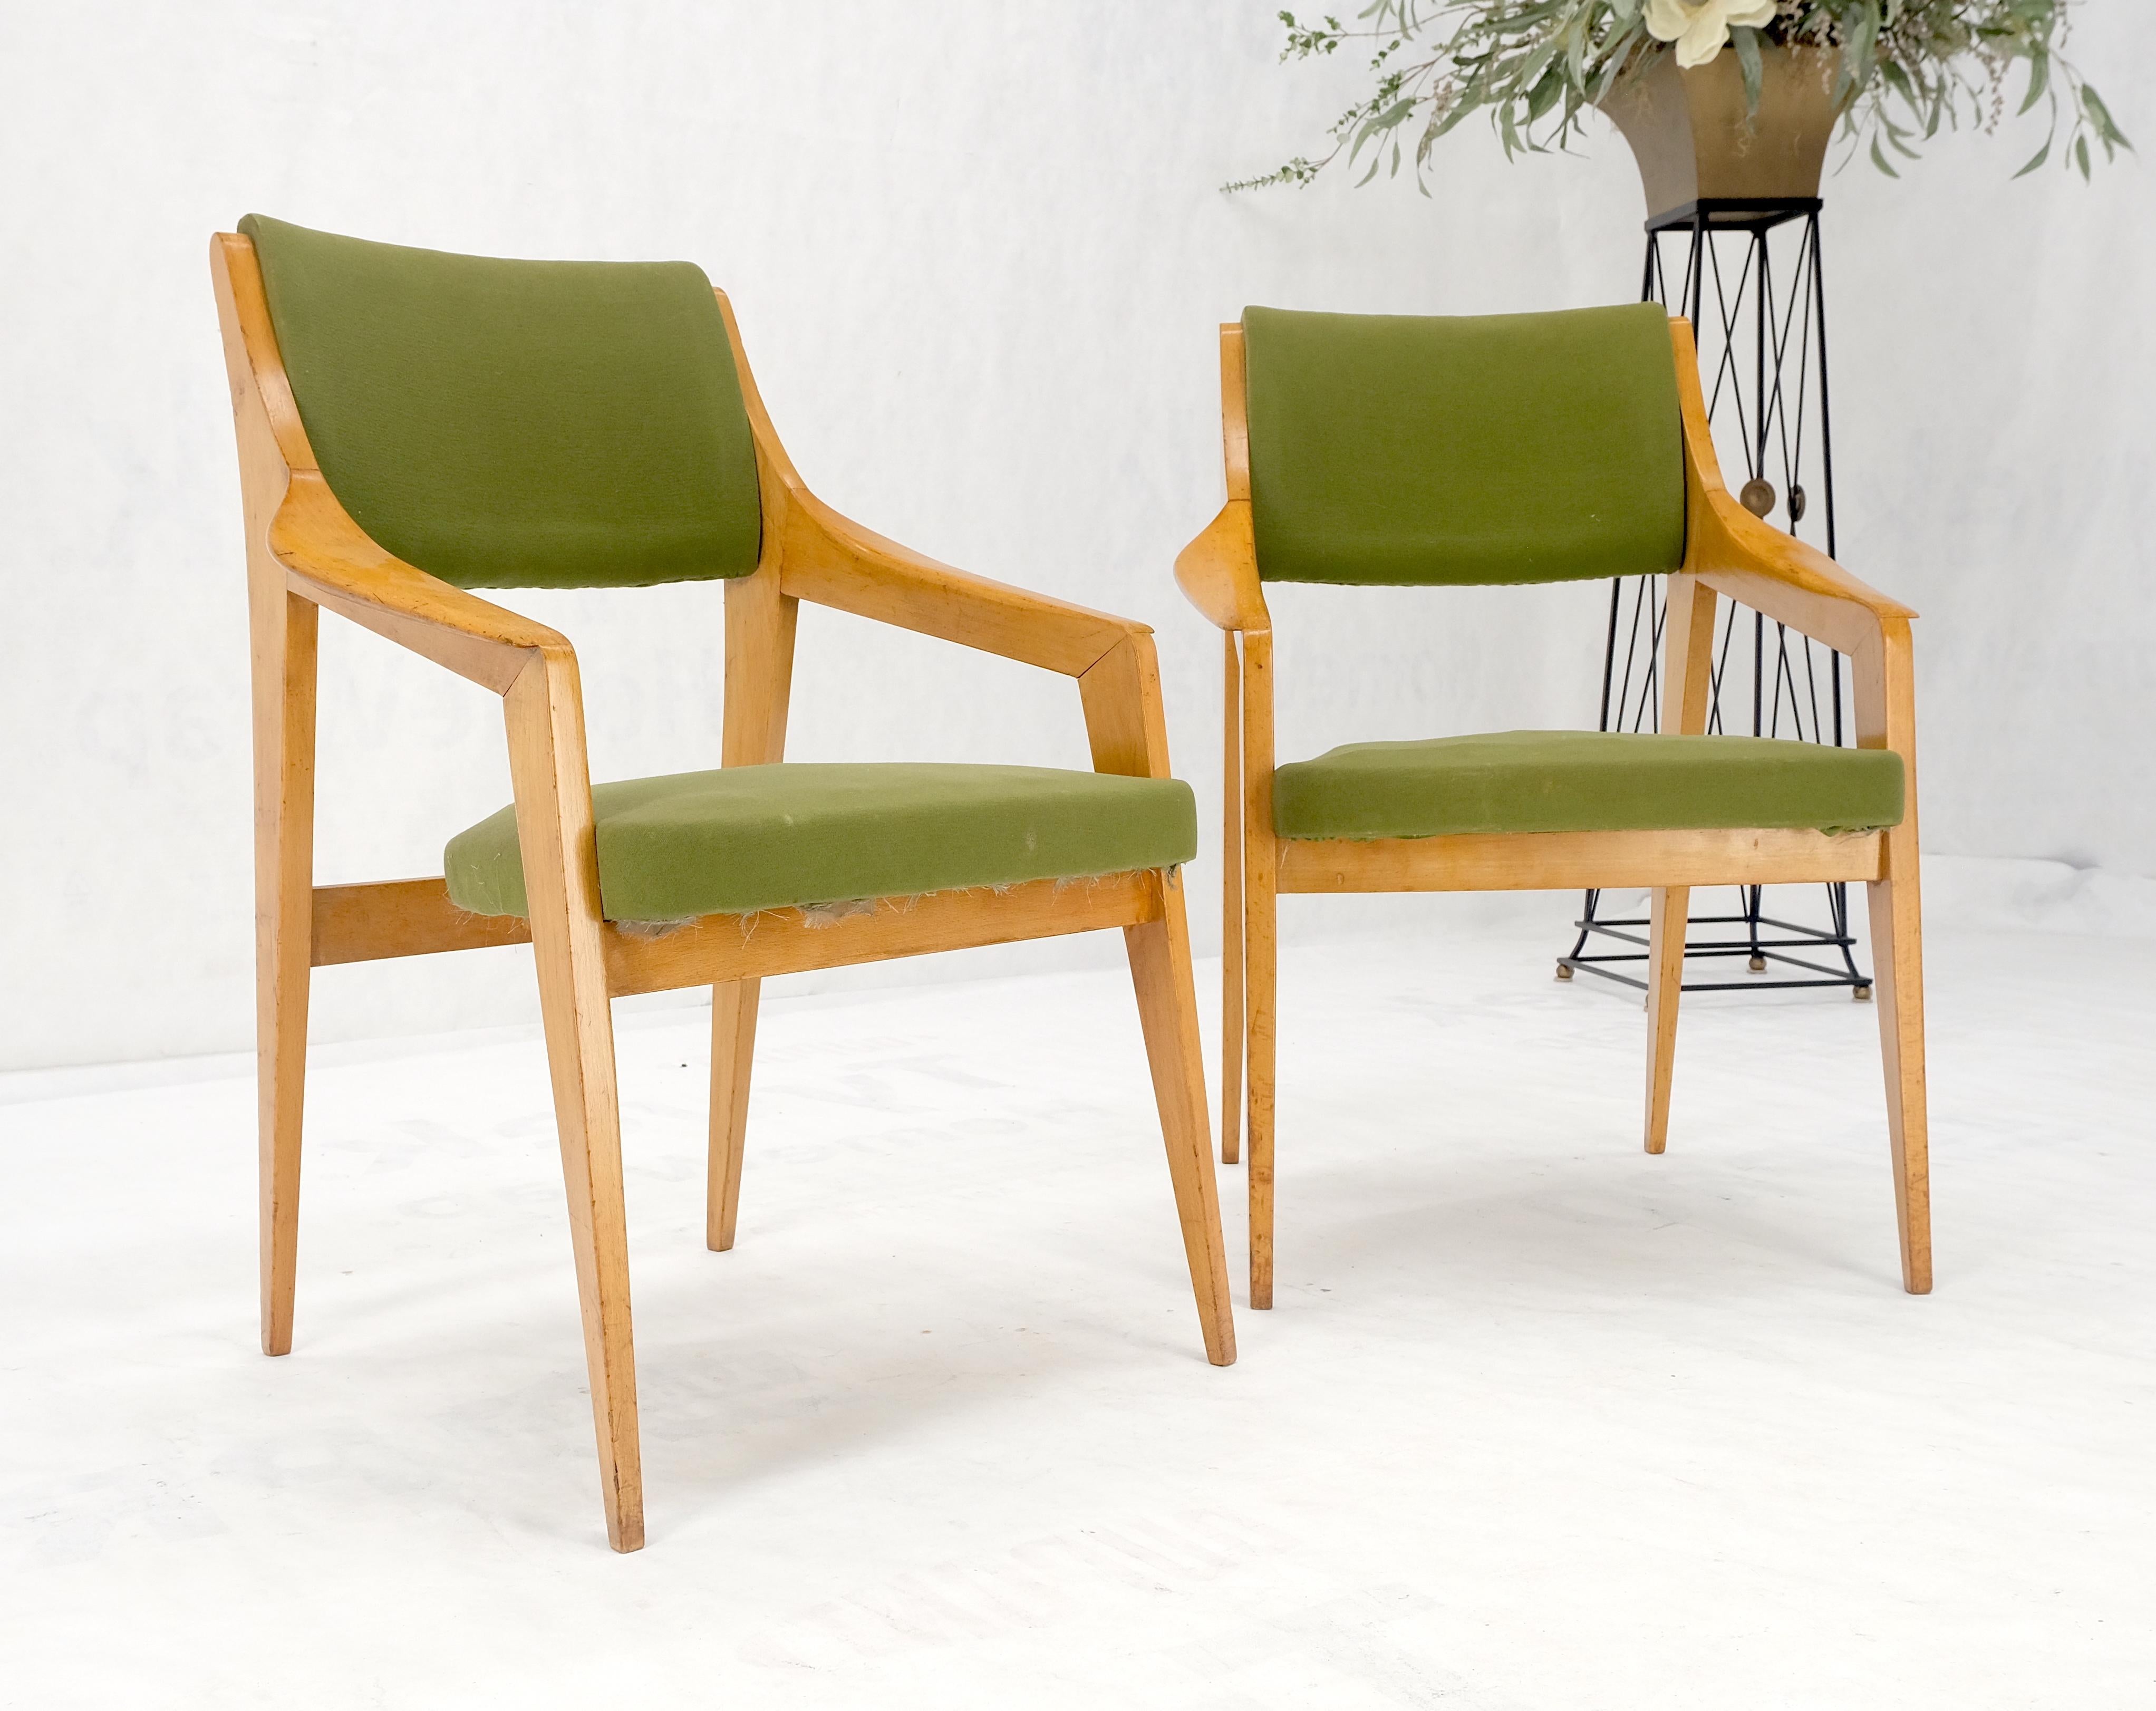 Pair of c1950s Blond Birch Scandinavian Swedish Arm Chairs Green Upholstery For Sale 9